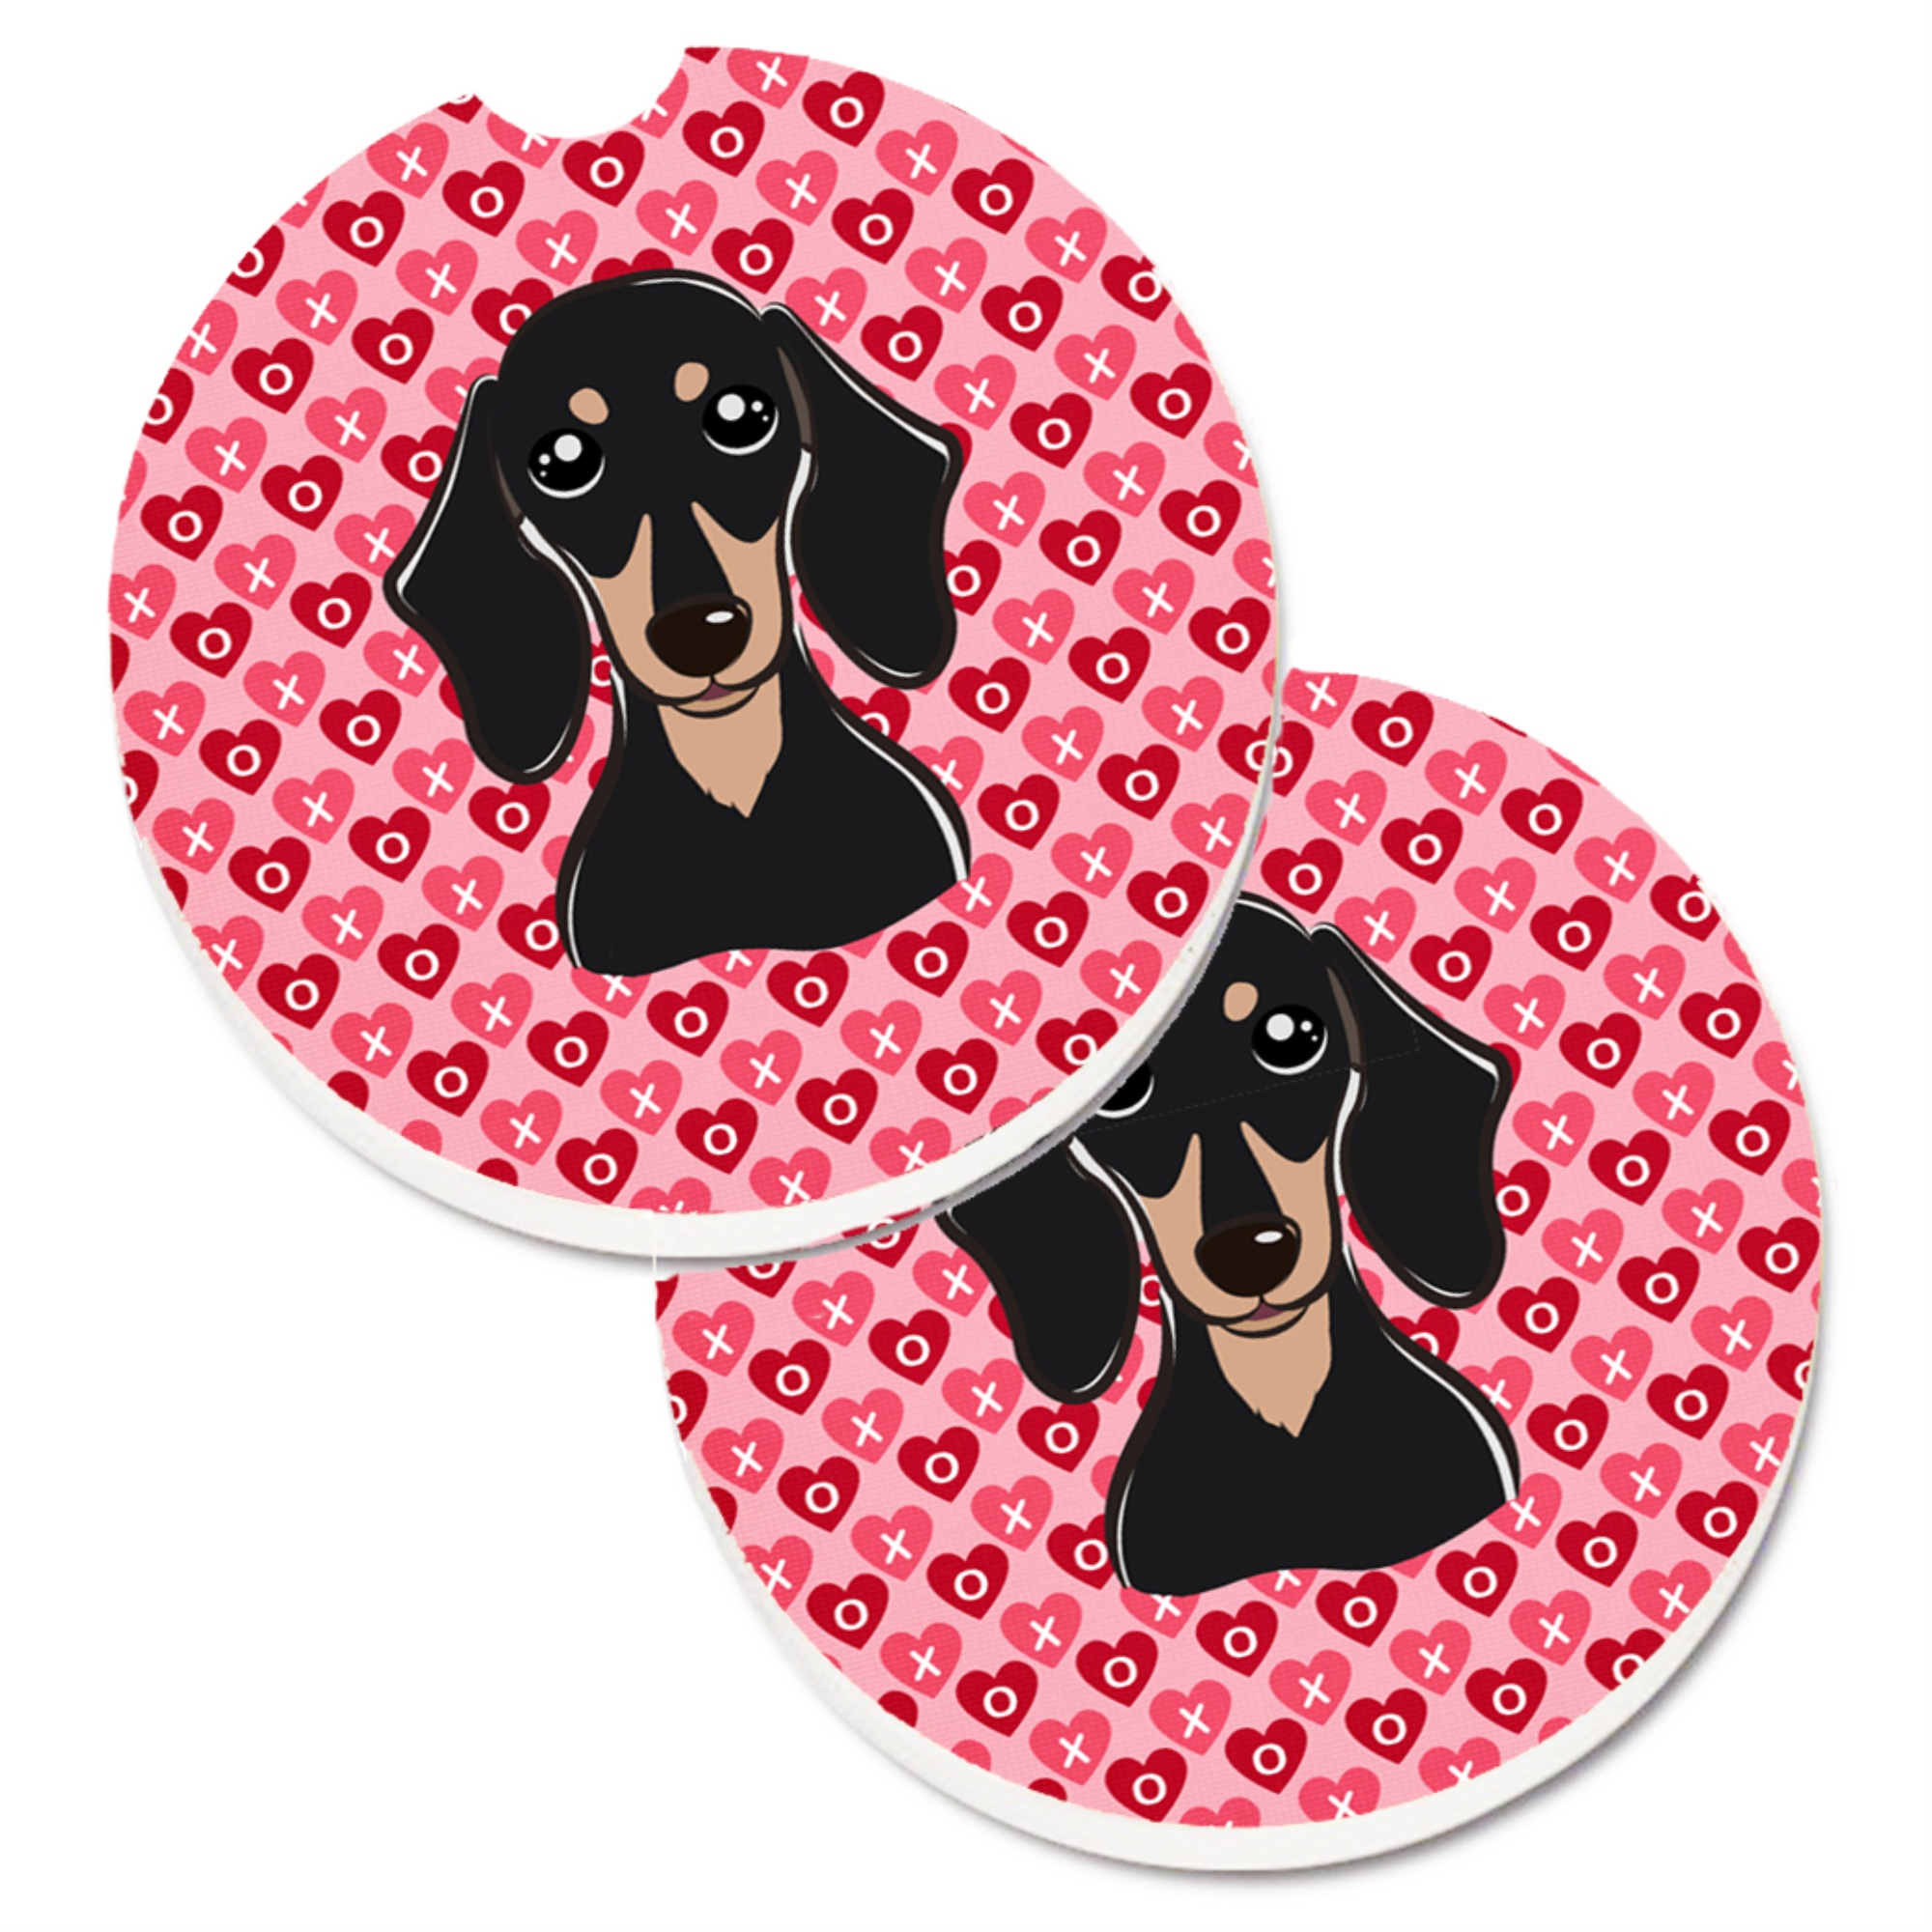 Caroline's Treasures "Caroline's Treasures Smooth black & Tan Dachshund Hearts Set of 2 Cup Holder Car Coasters, 2.56, Multicolor"